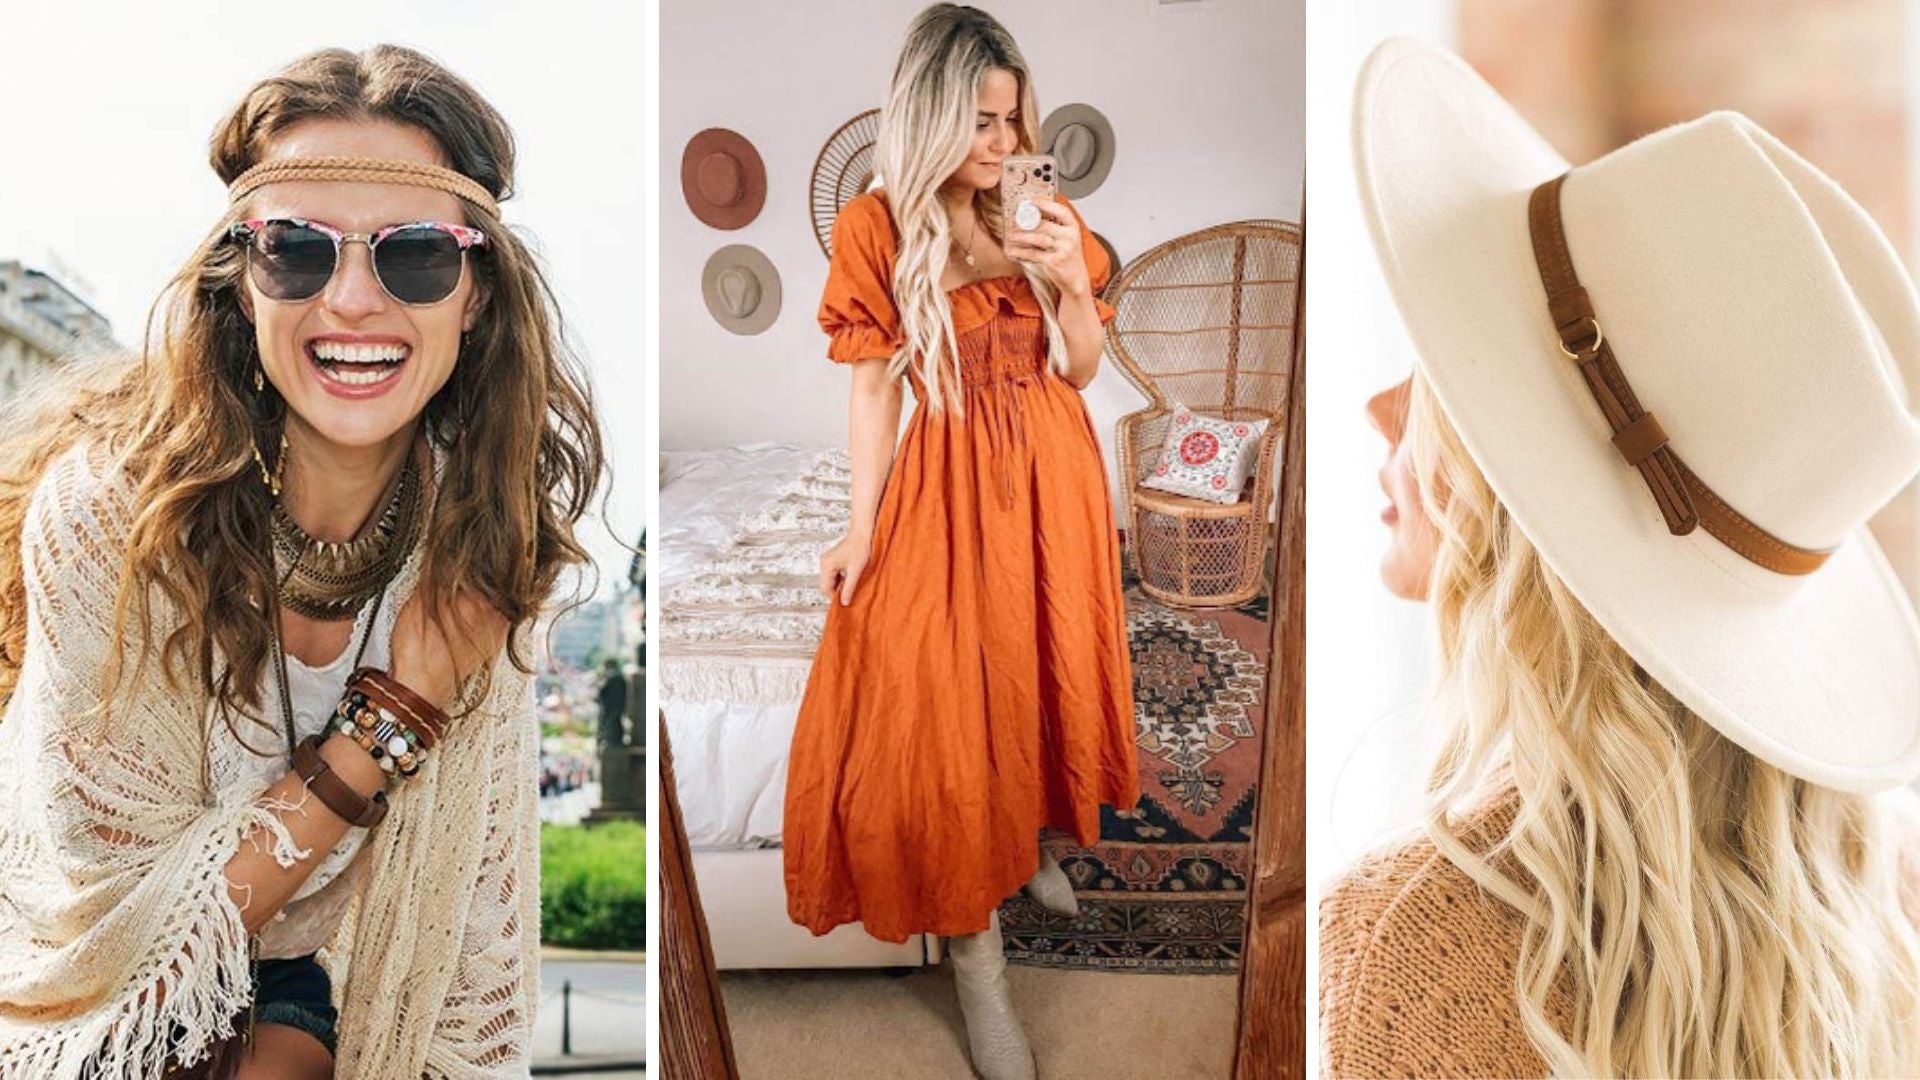 Spring Festival Style: Bohemian And Alternative Looks